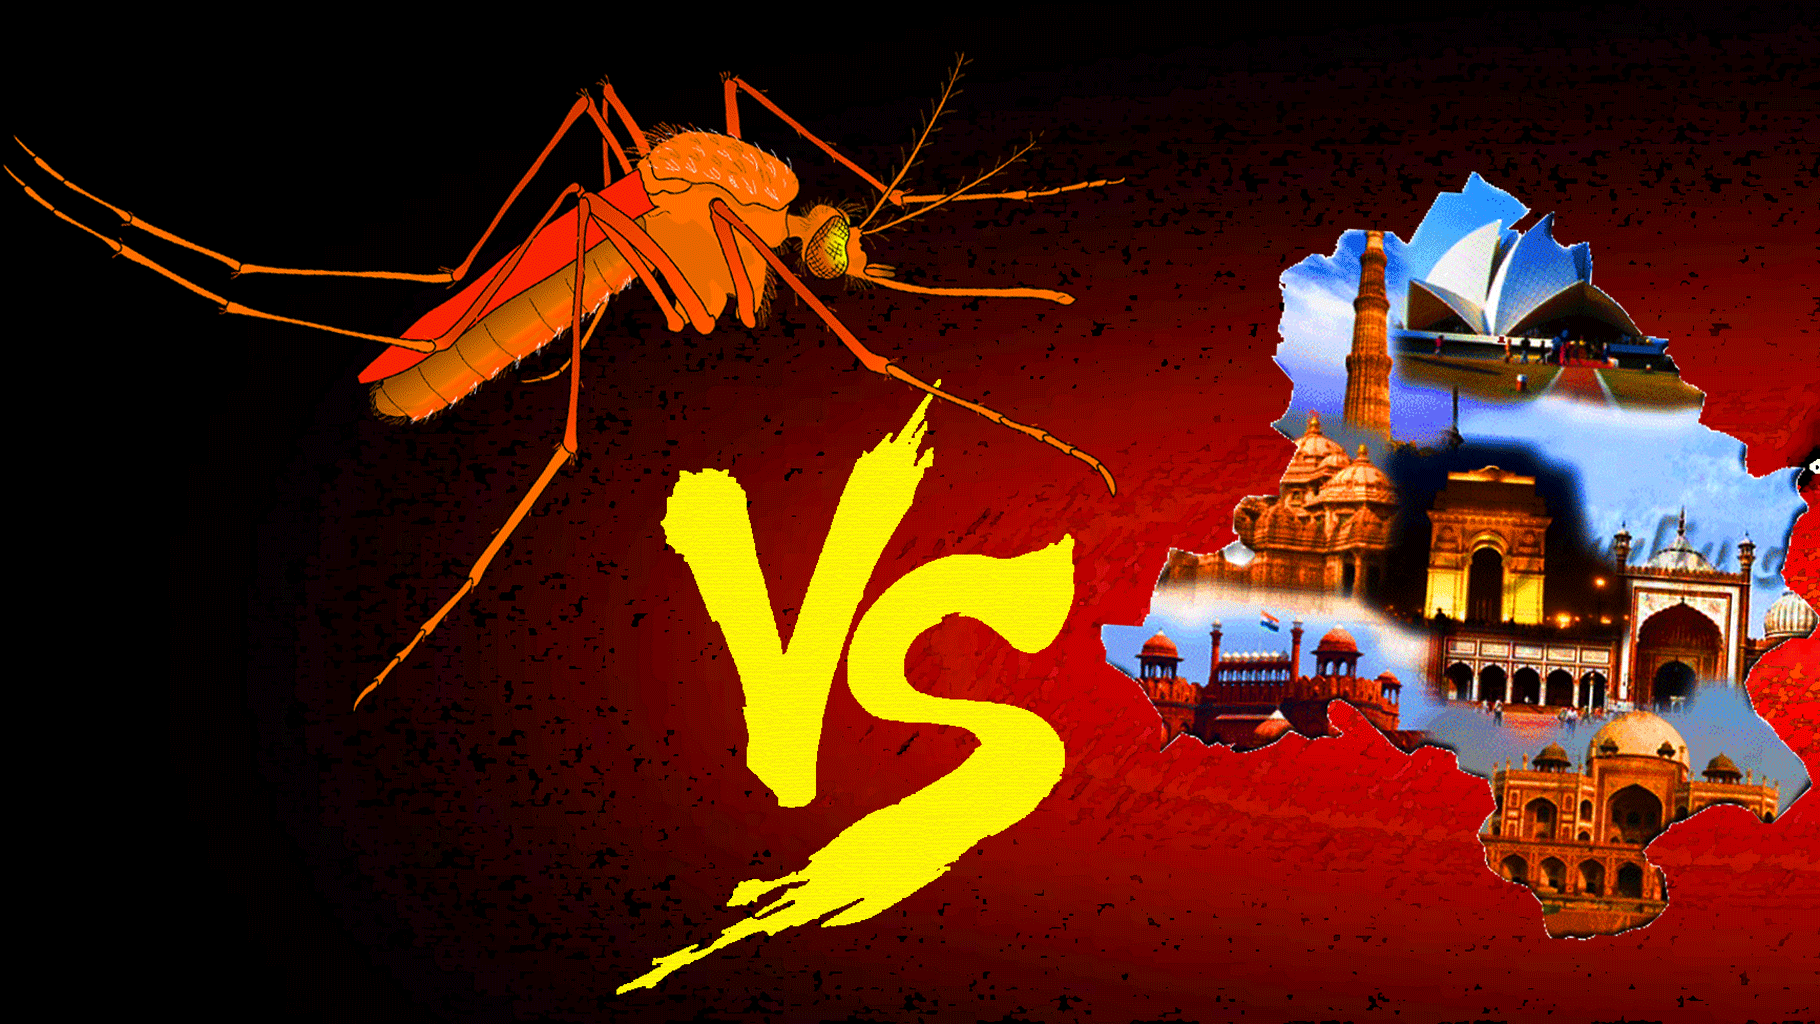  Delhi’s annual tryst with mosquito-0borne diseases has an uninvited guest — chikungunya. Before its deadlier cousin Zika joins in, the government has a long road of challenges.  (Photo: Nikita Mishra/<b><i>The Quint</i></b>)